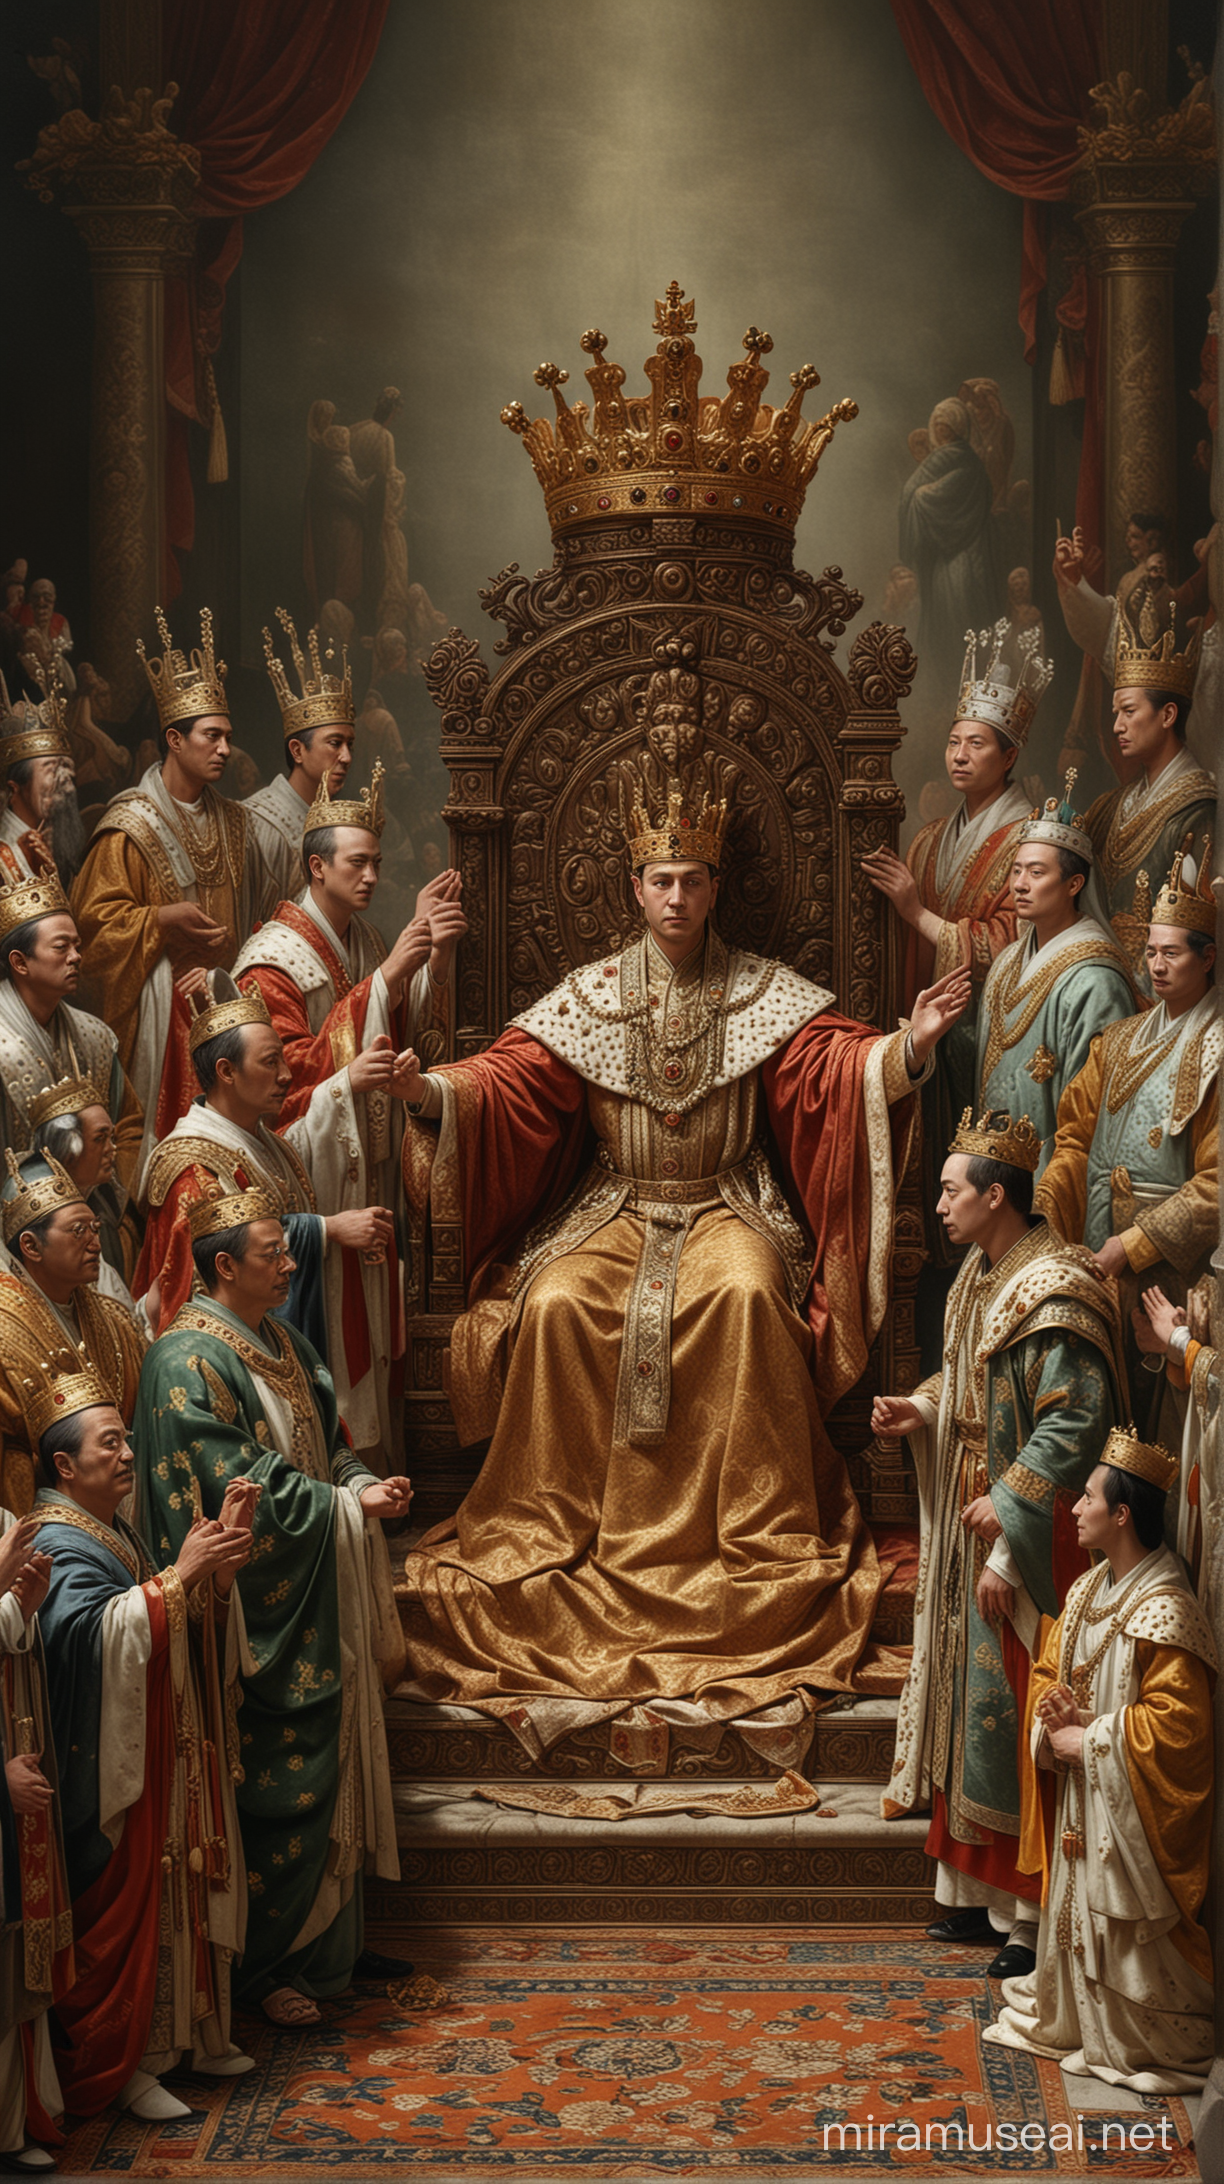 Image of a young emperor being crowned, surrounded by officials and advisors. hyper realistic